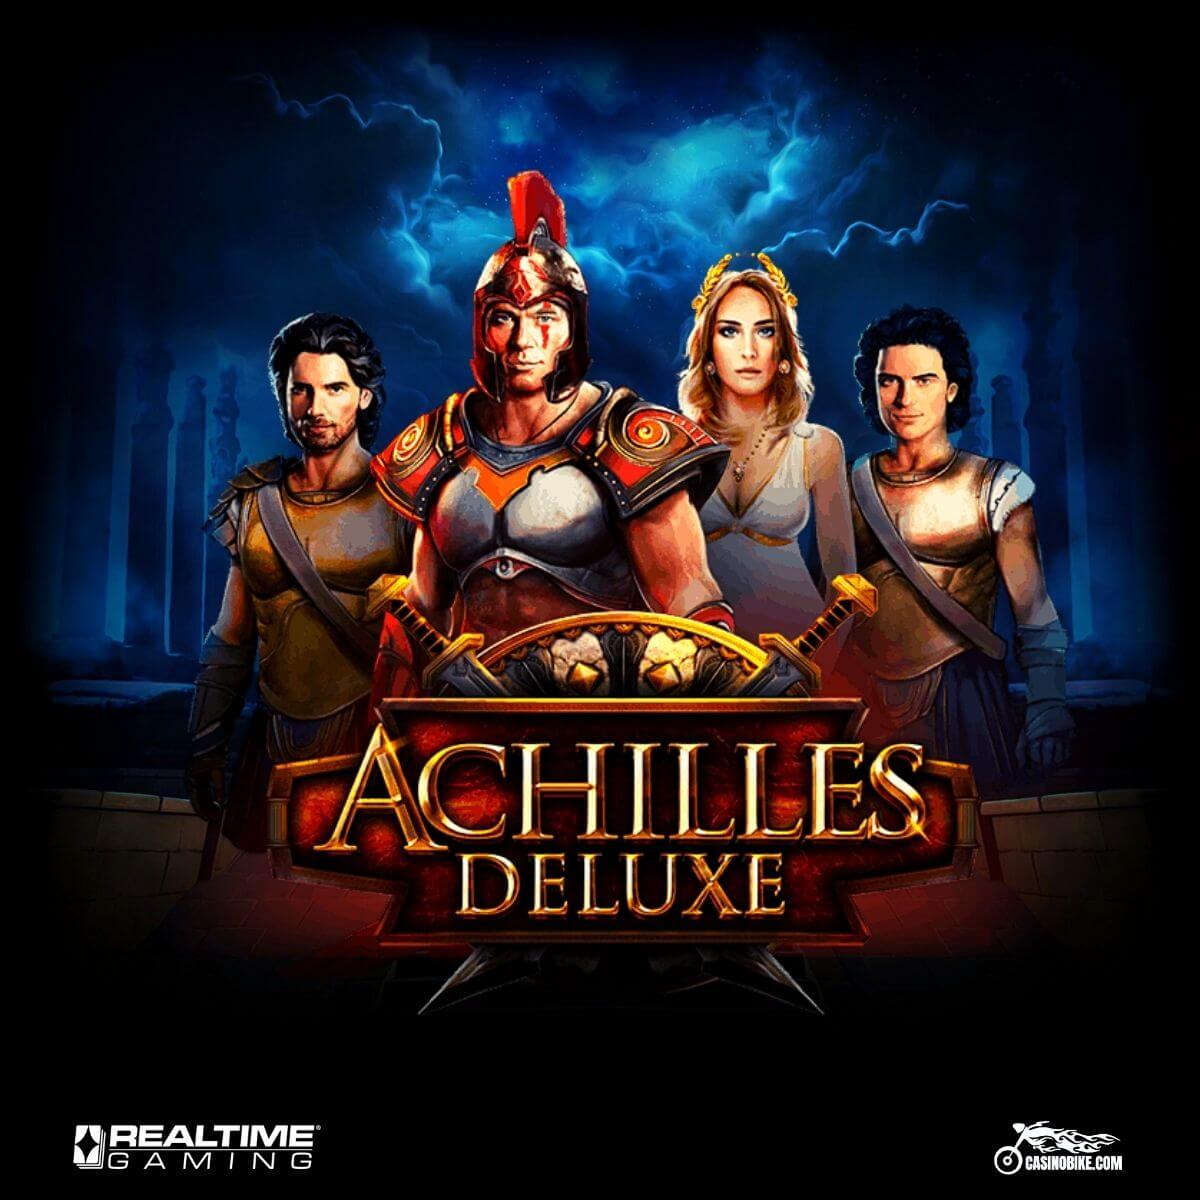 Achilles Deluxe Slot by Real Time Gaming